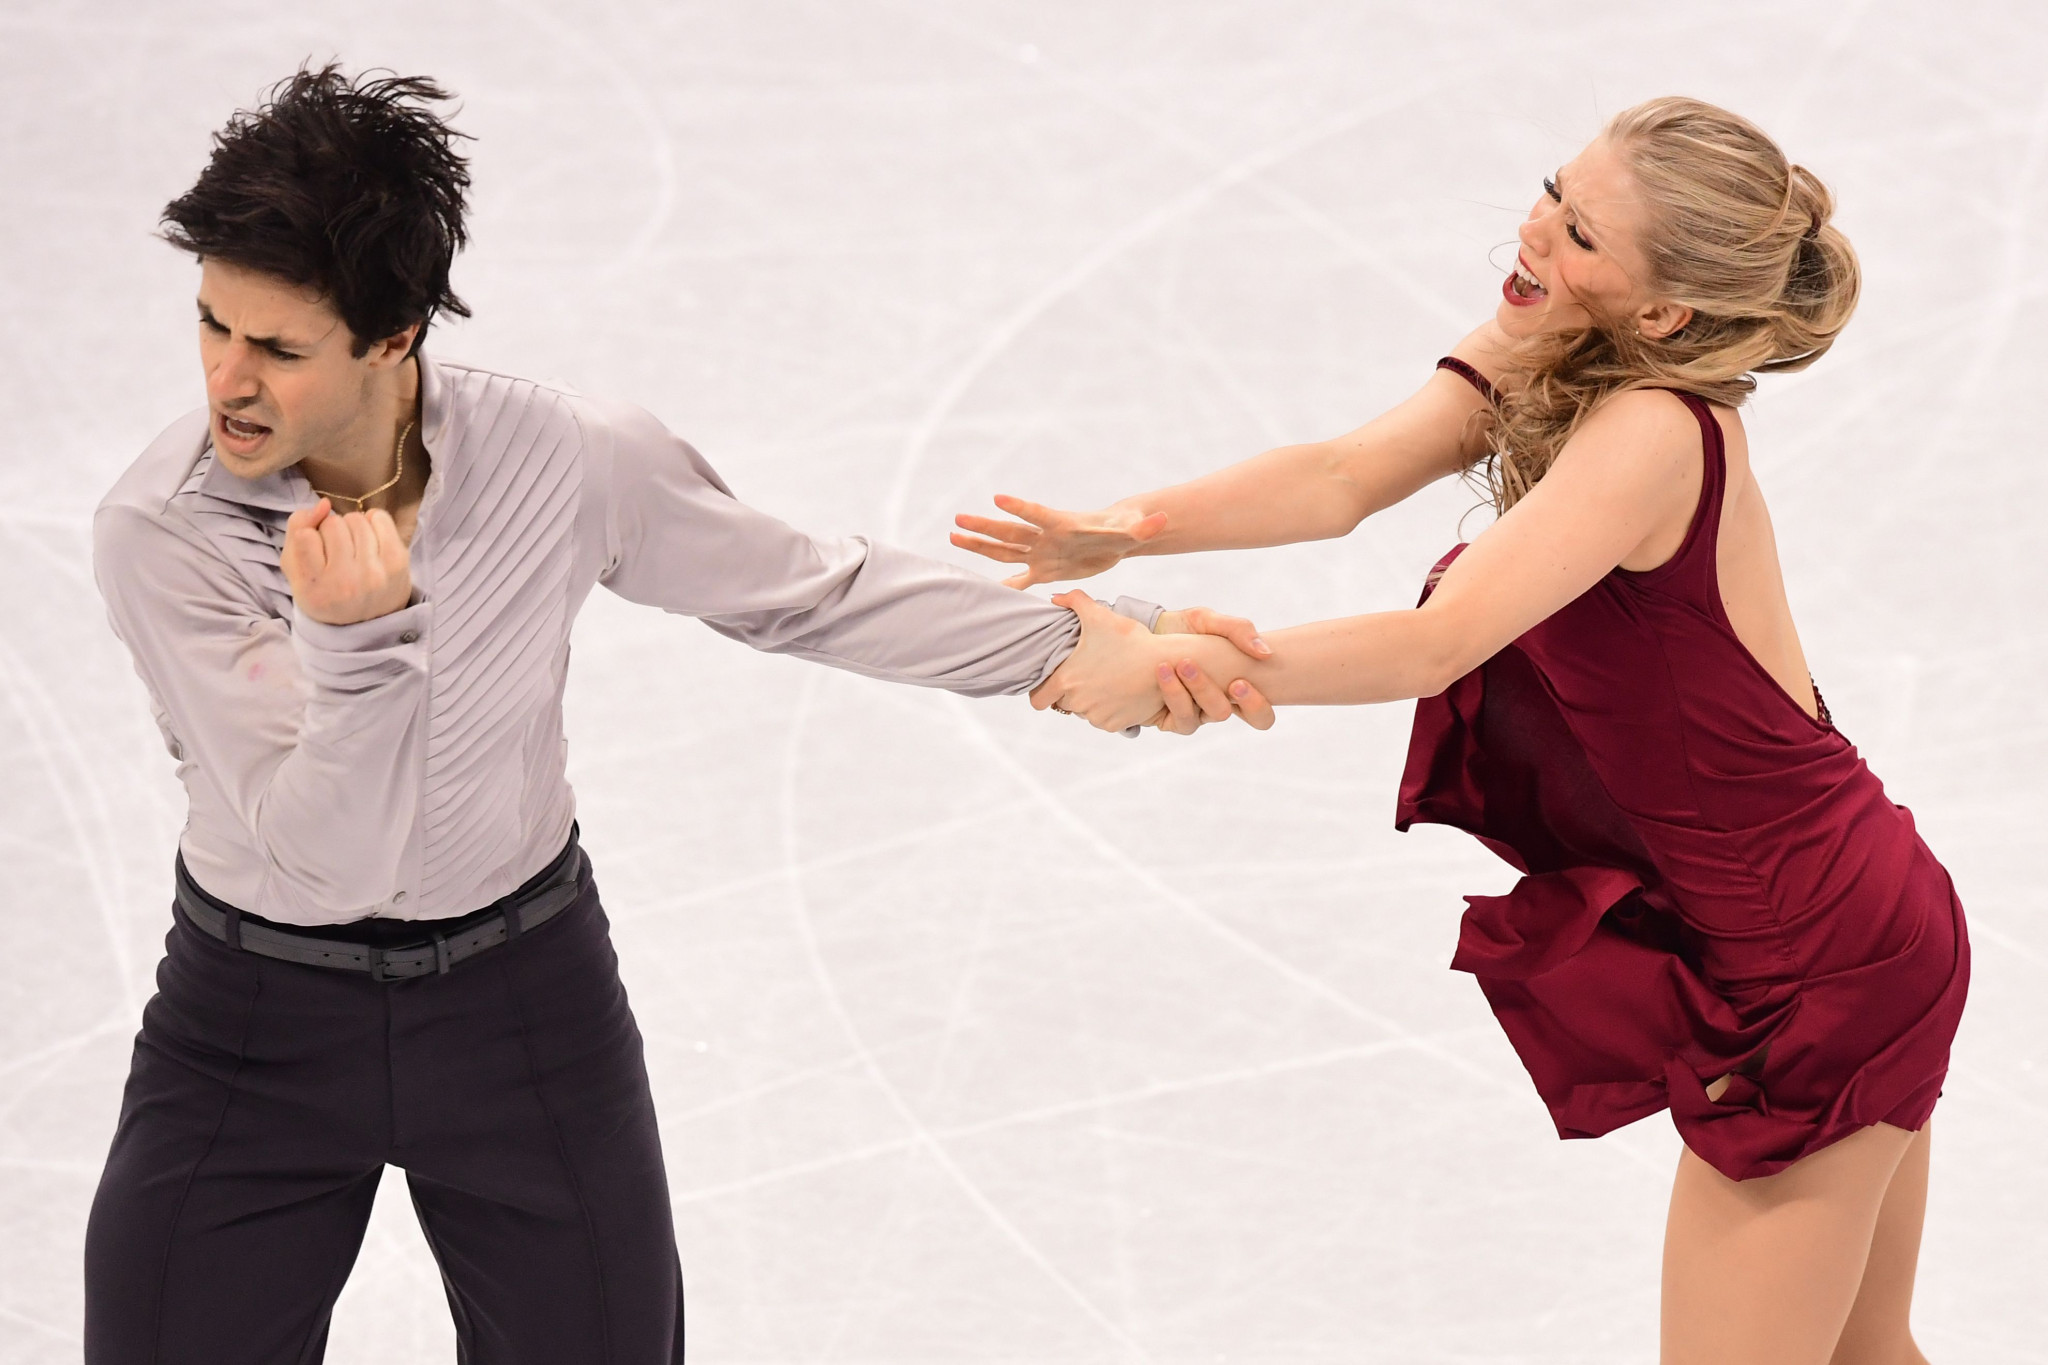 Kaitlyn Weaver and Andrew Poje have opted to evaluate their future plans ©Getty Images